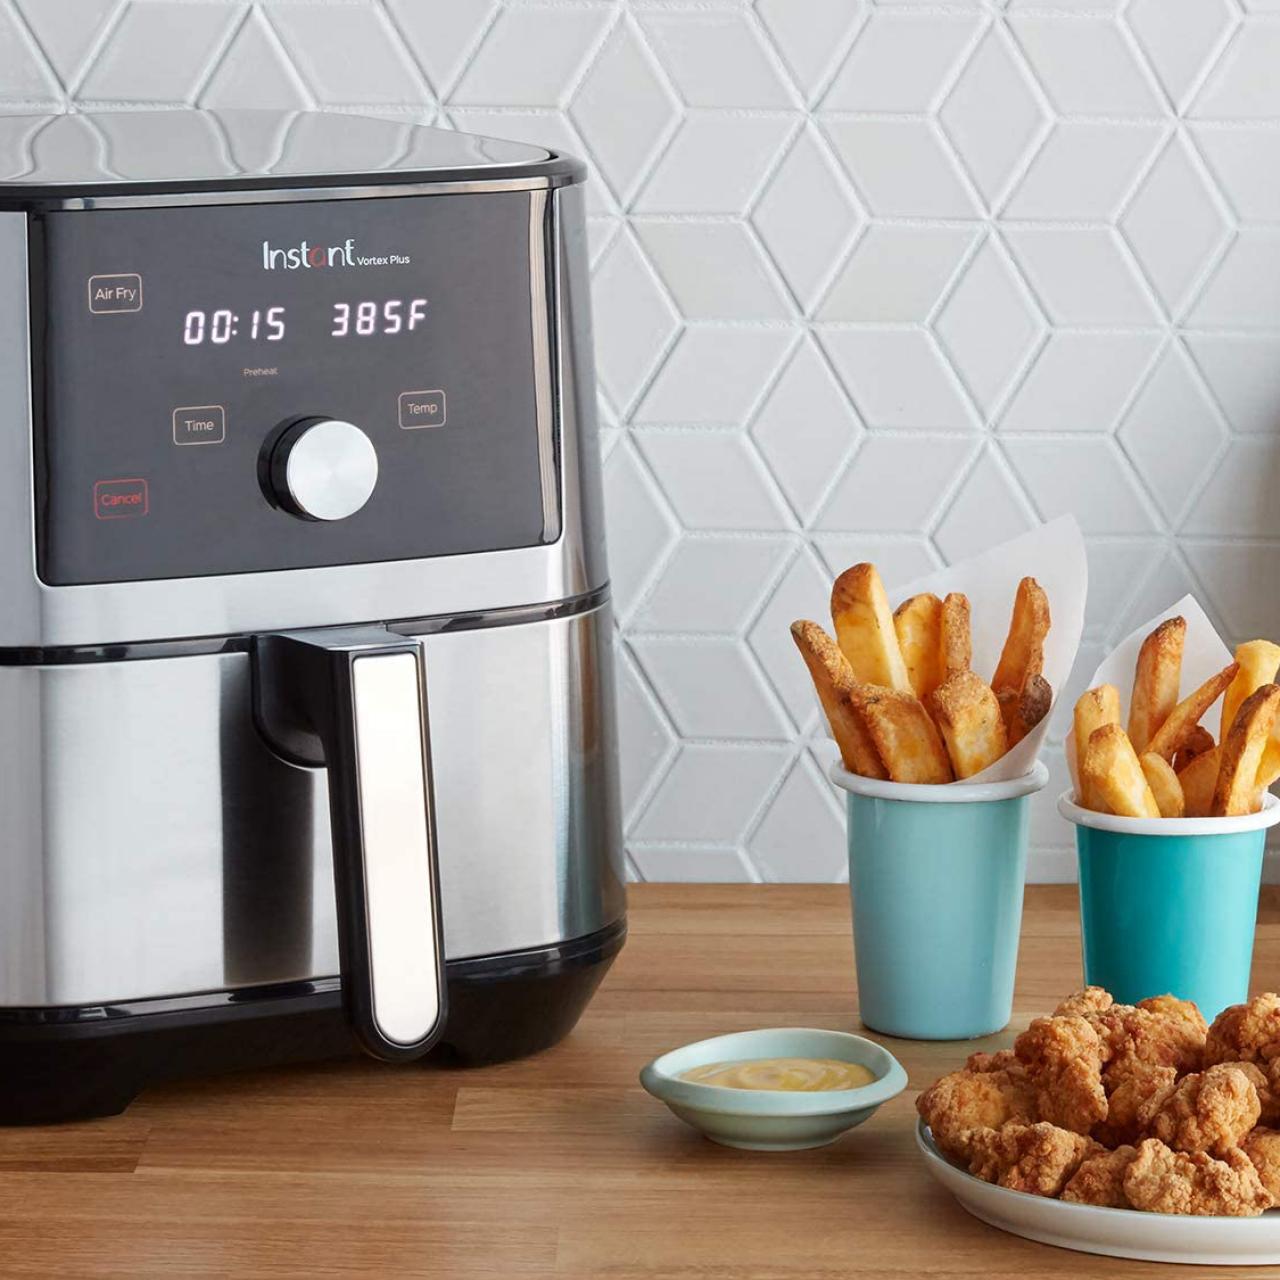 Instant Pot Vortex Air Fryer French Fries Recipe – FOOD is Four